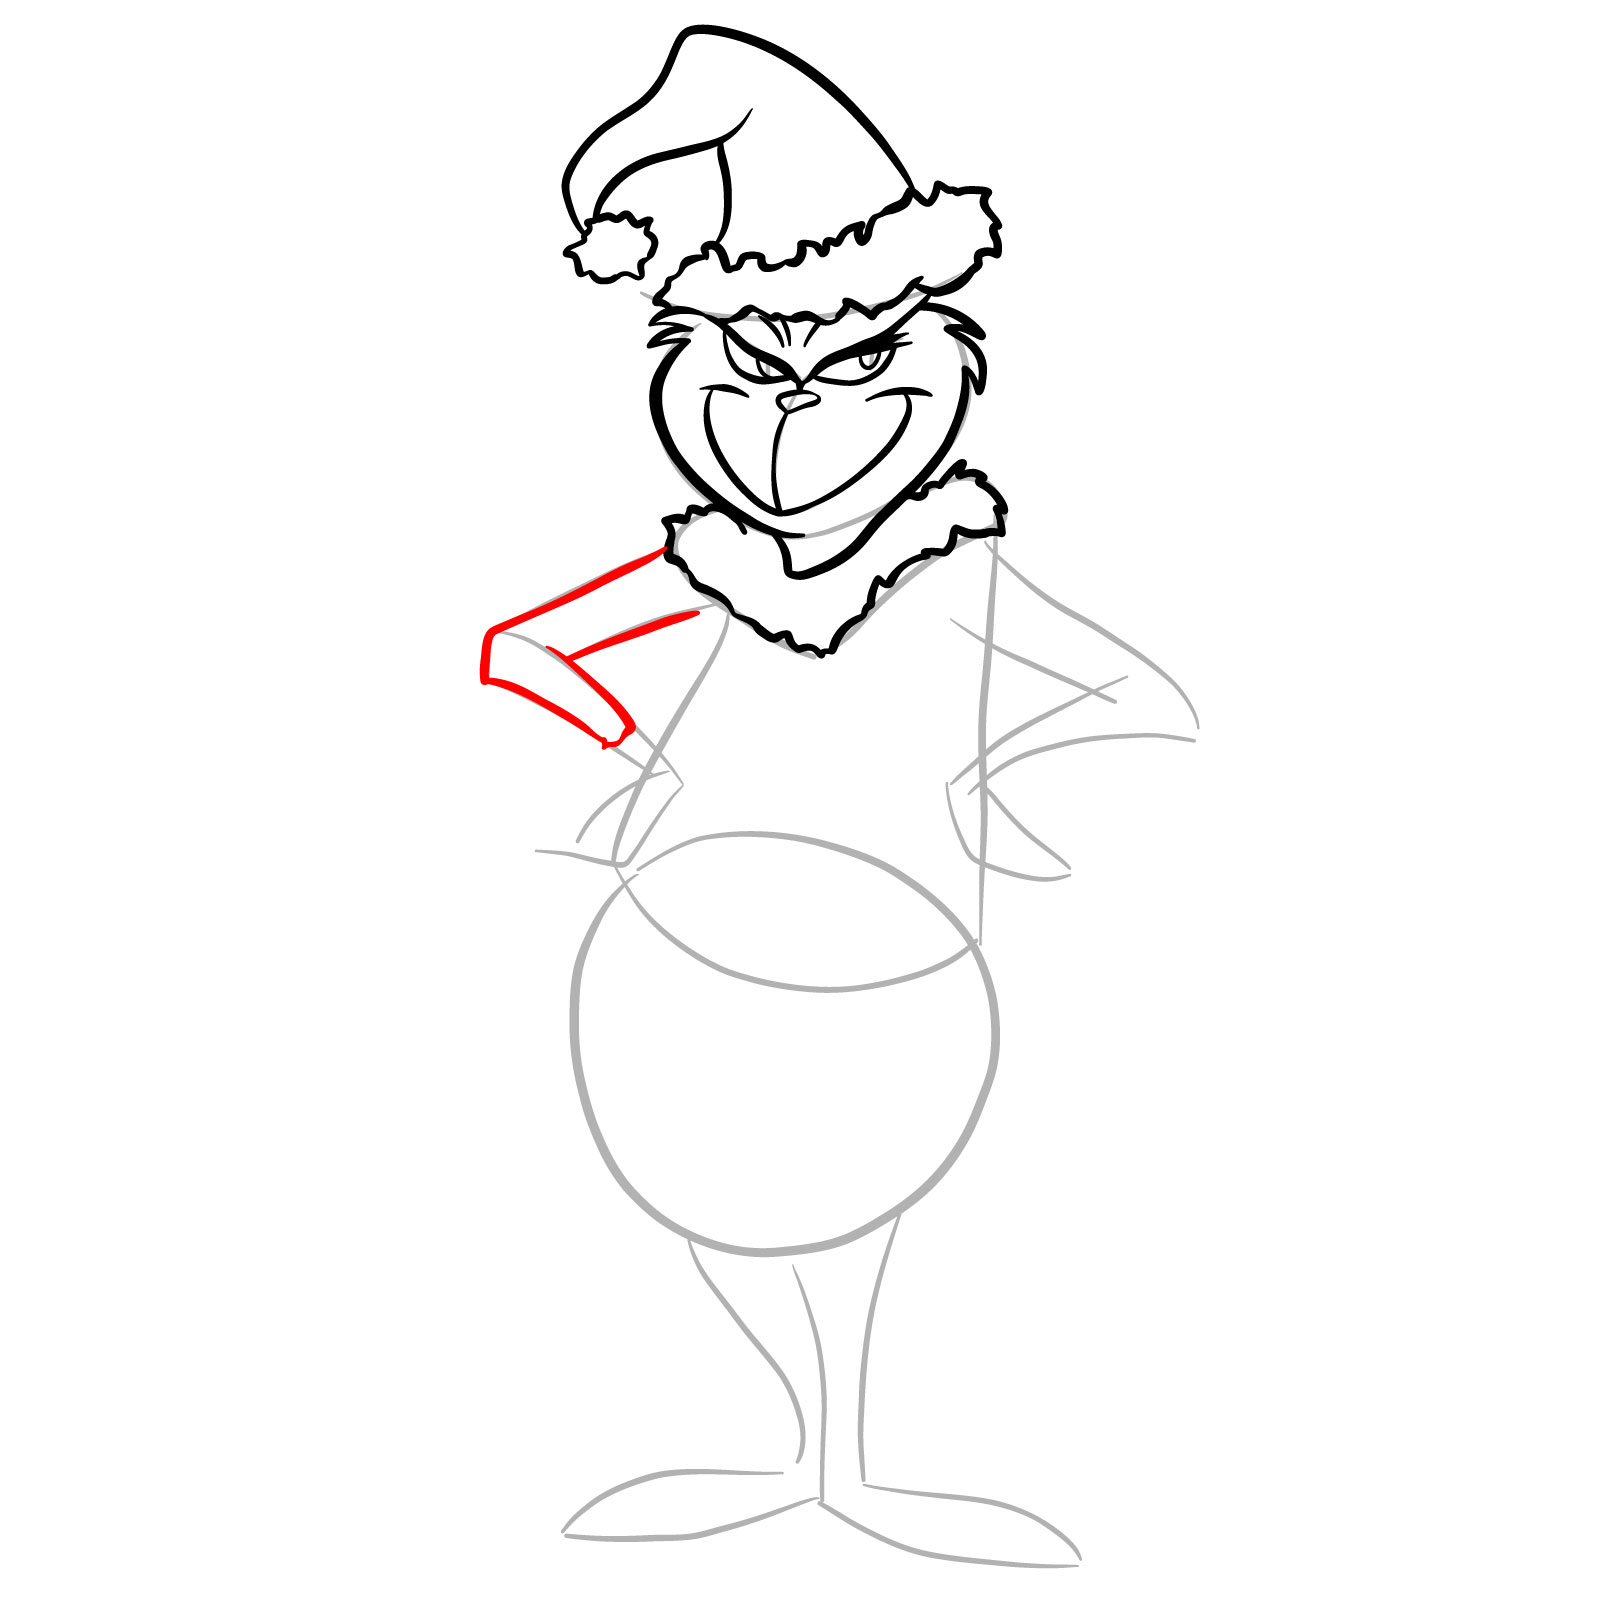 How to draw The Grinch in a Christmas costume - step 13